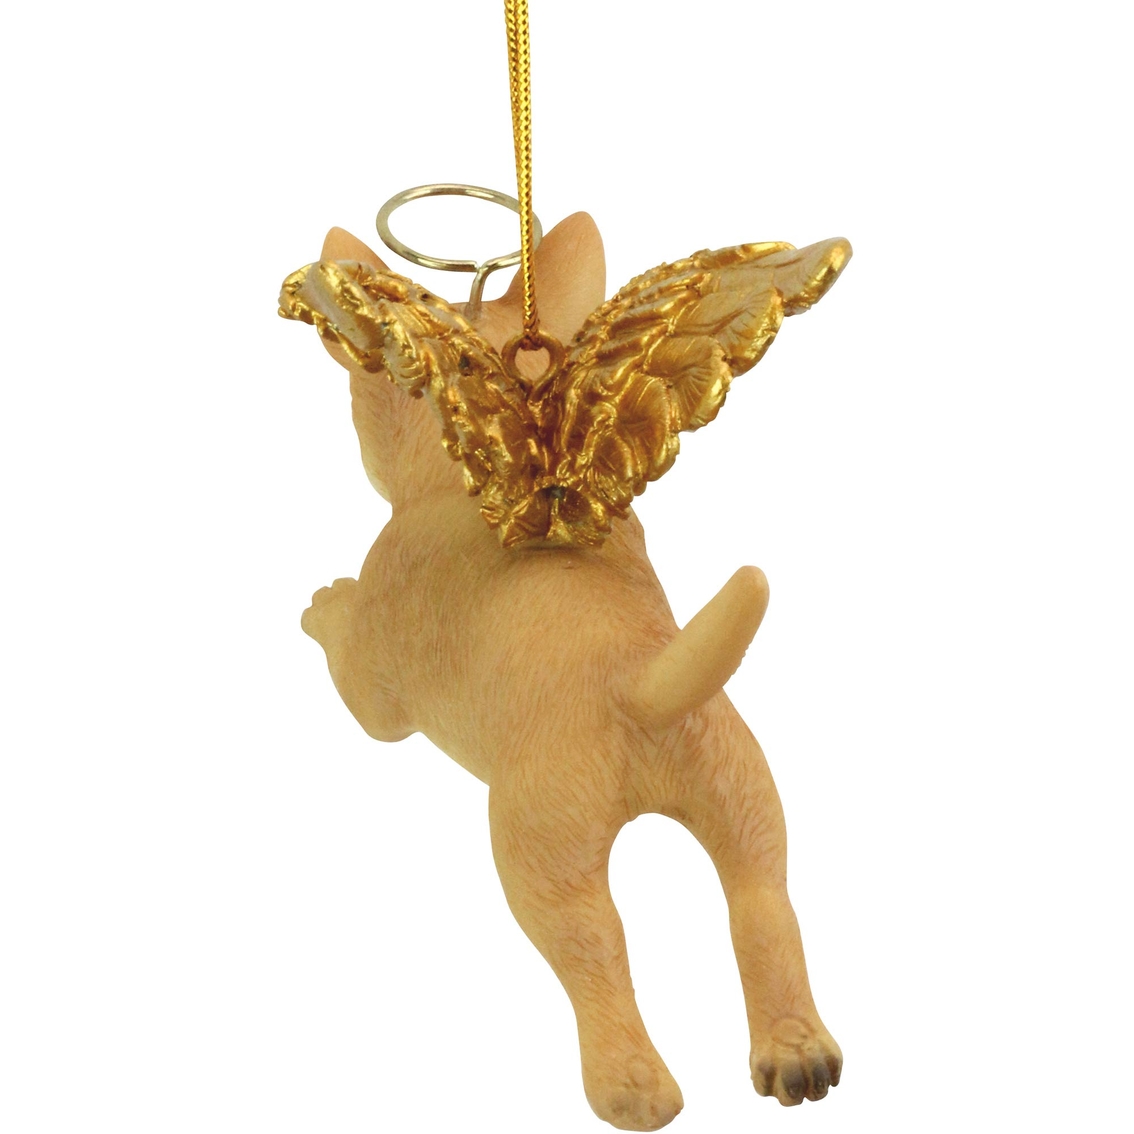 Design Toscano Honor the Pooch - Chihuahua Holiday Dog Angel Ornament - Image 2 of 4